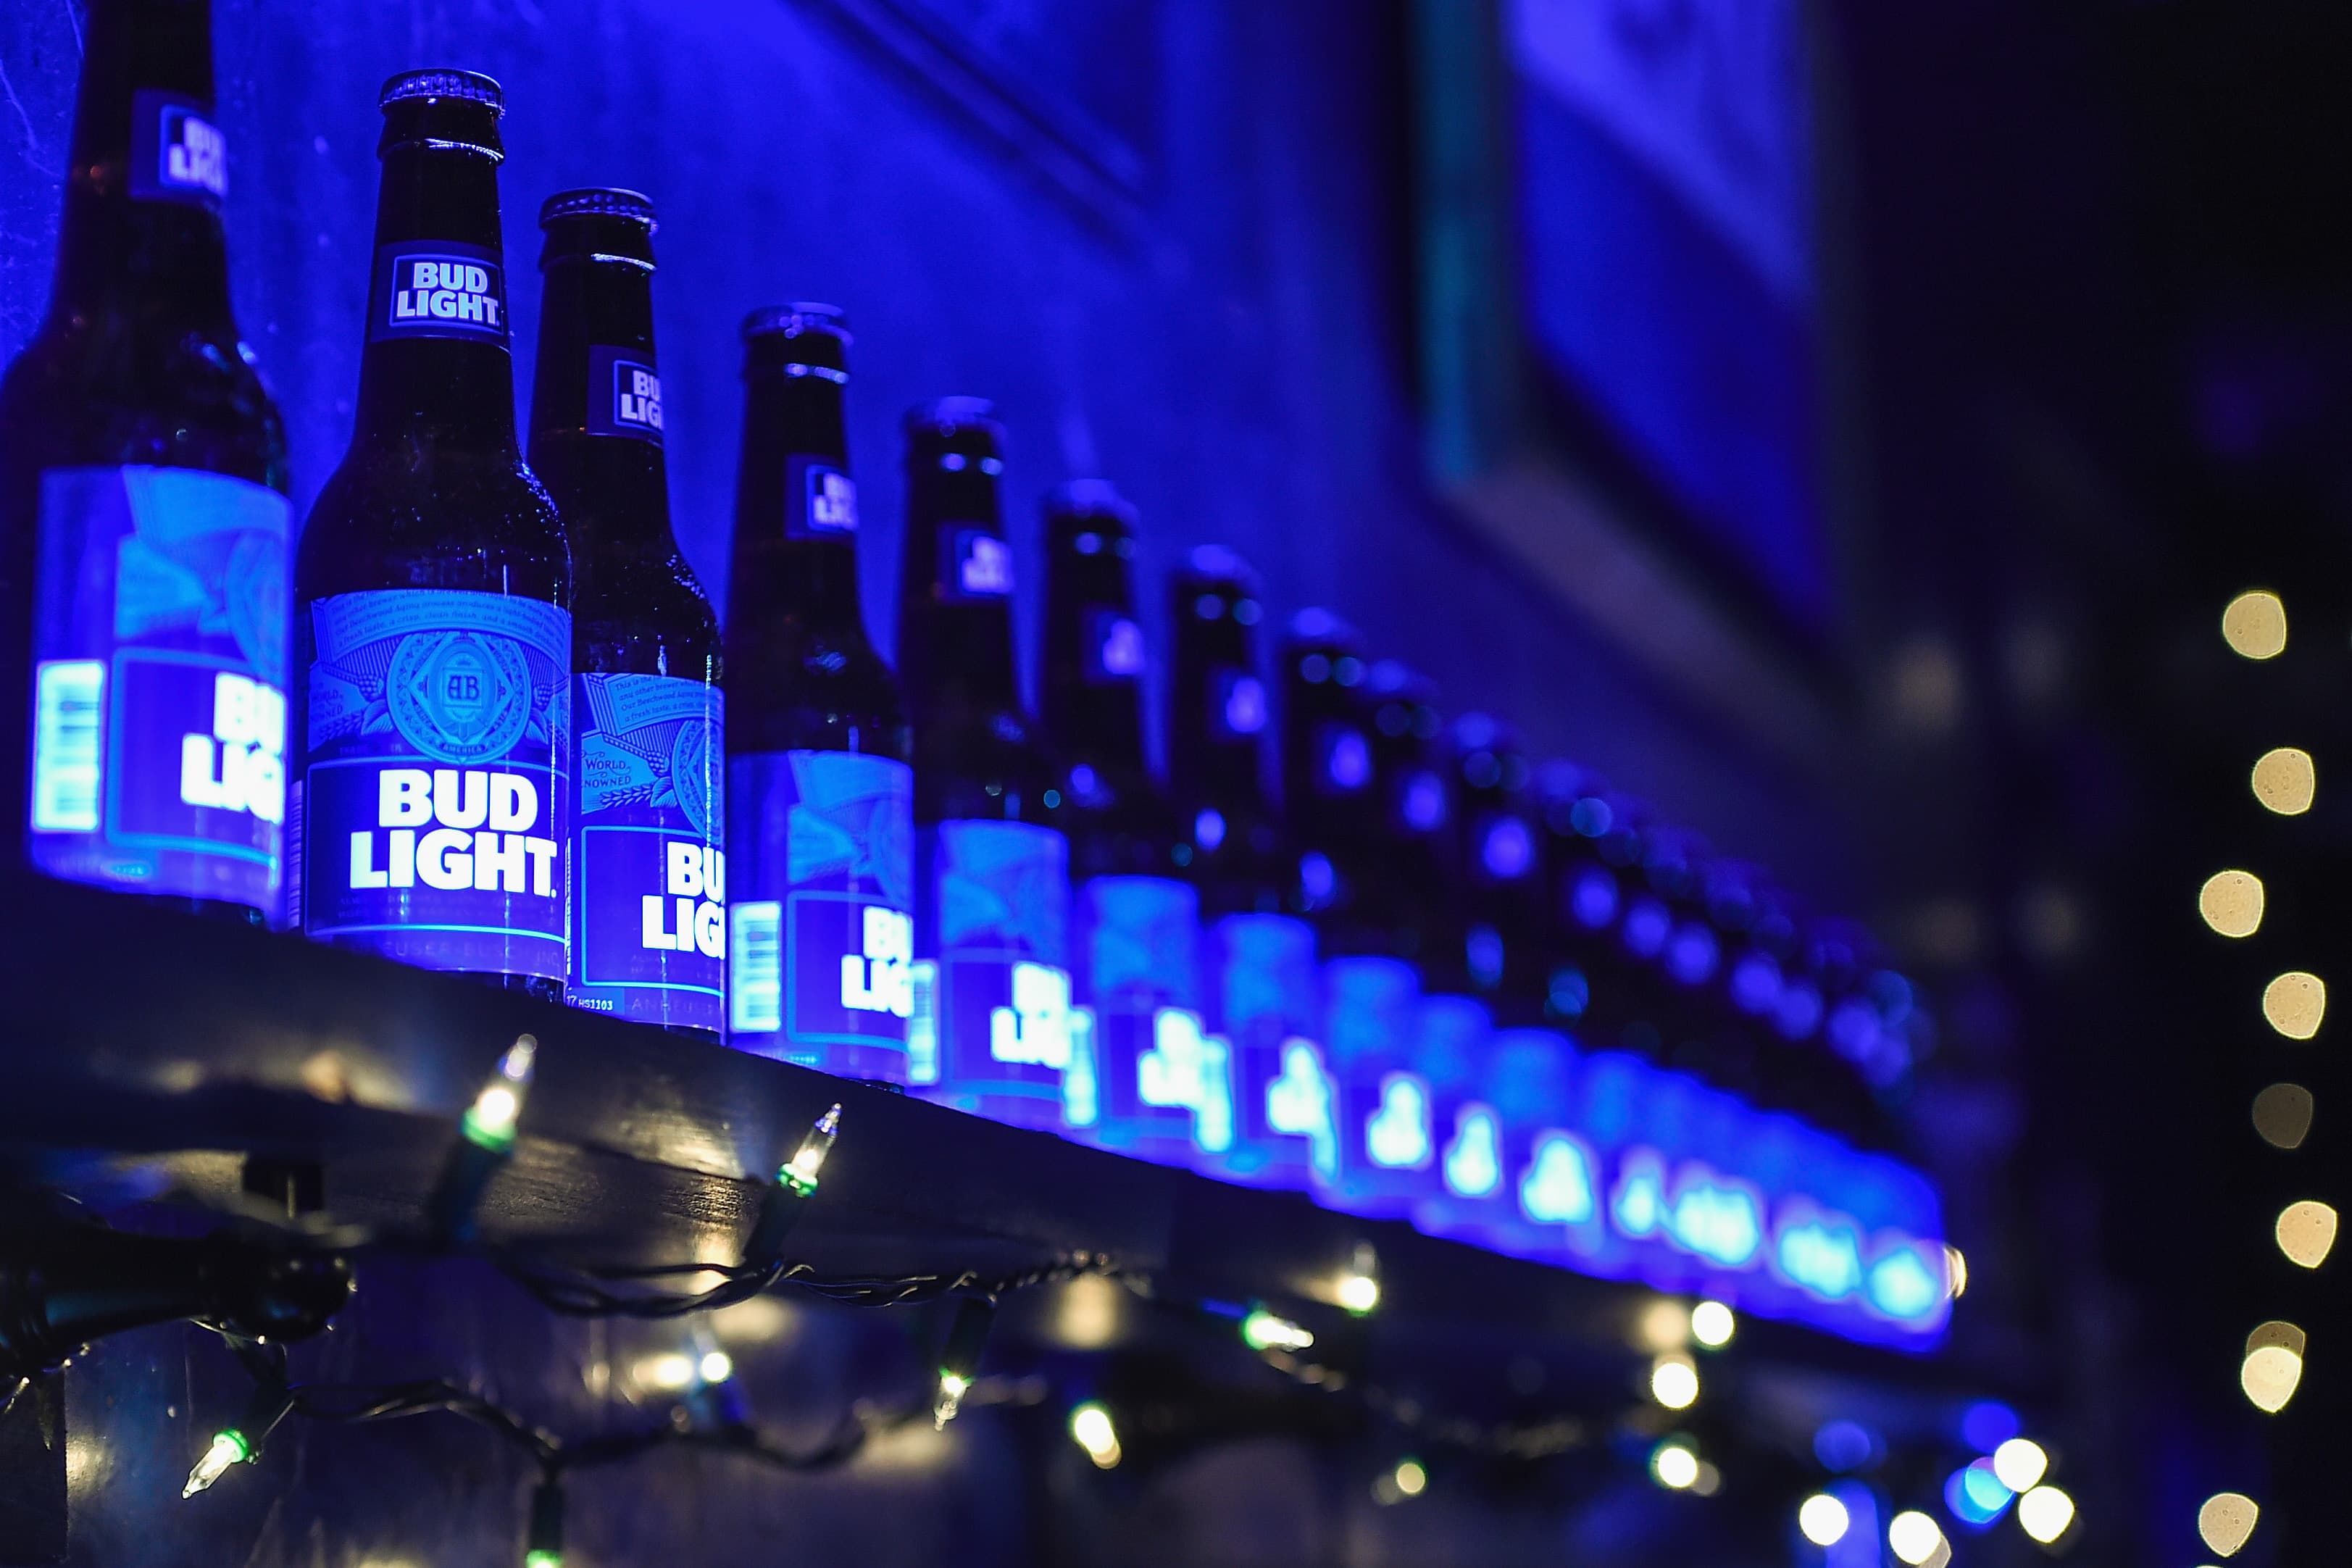 Bernstein says Anheuser-Busch InBev selloff is overdone even as Bud Light sales volumes are expected to drop